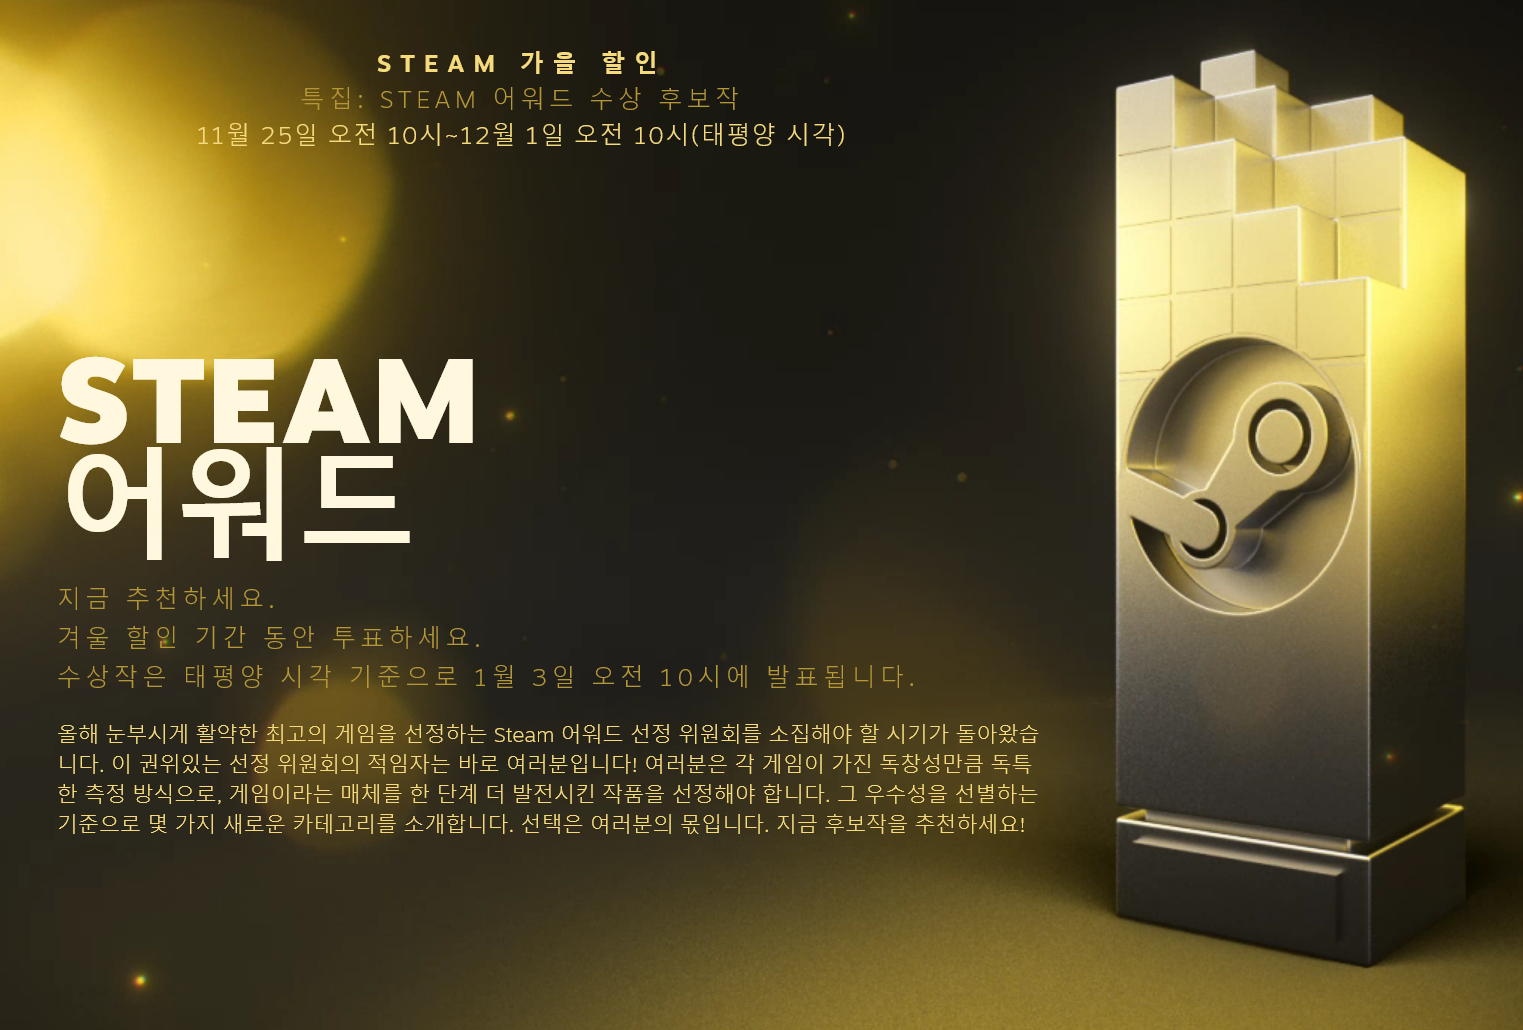 Screenshot_2020-11-26 Nominate Games for the Steam Awards.png